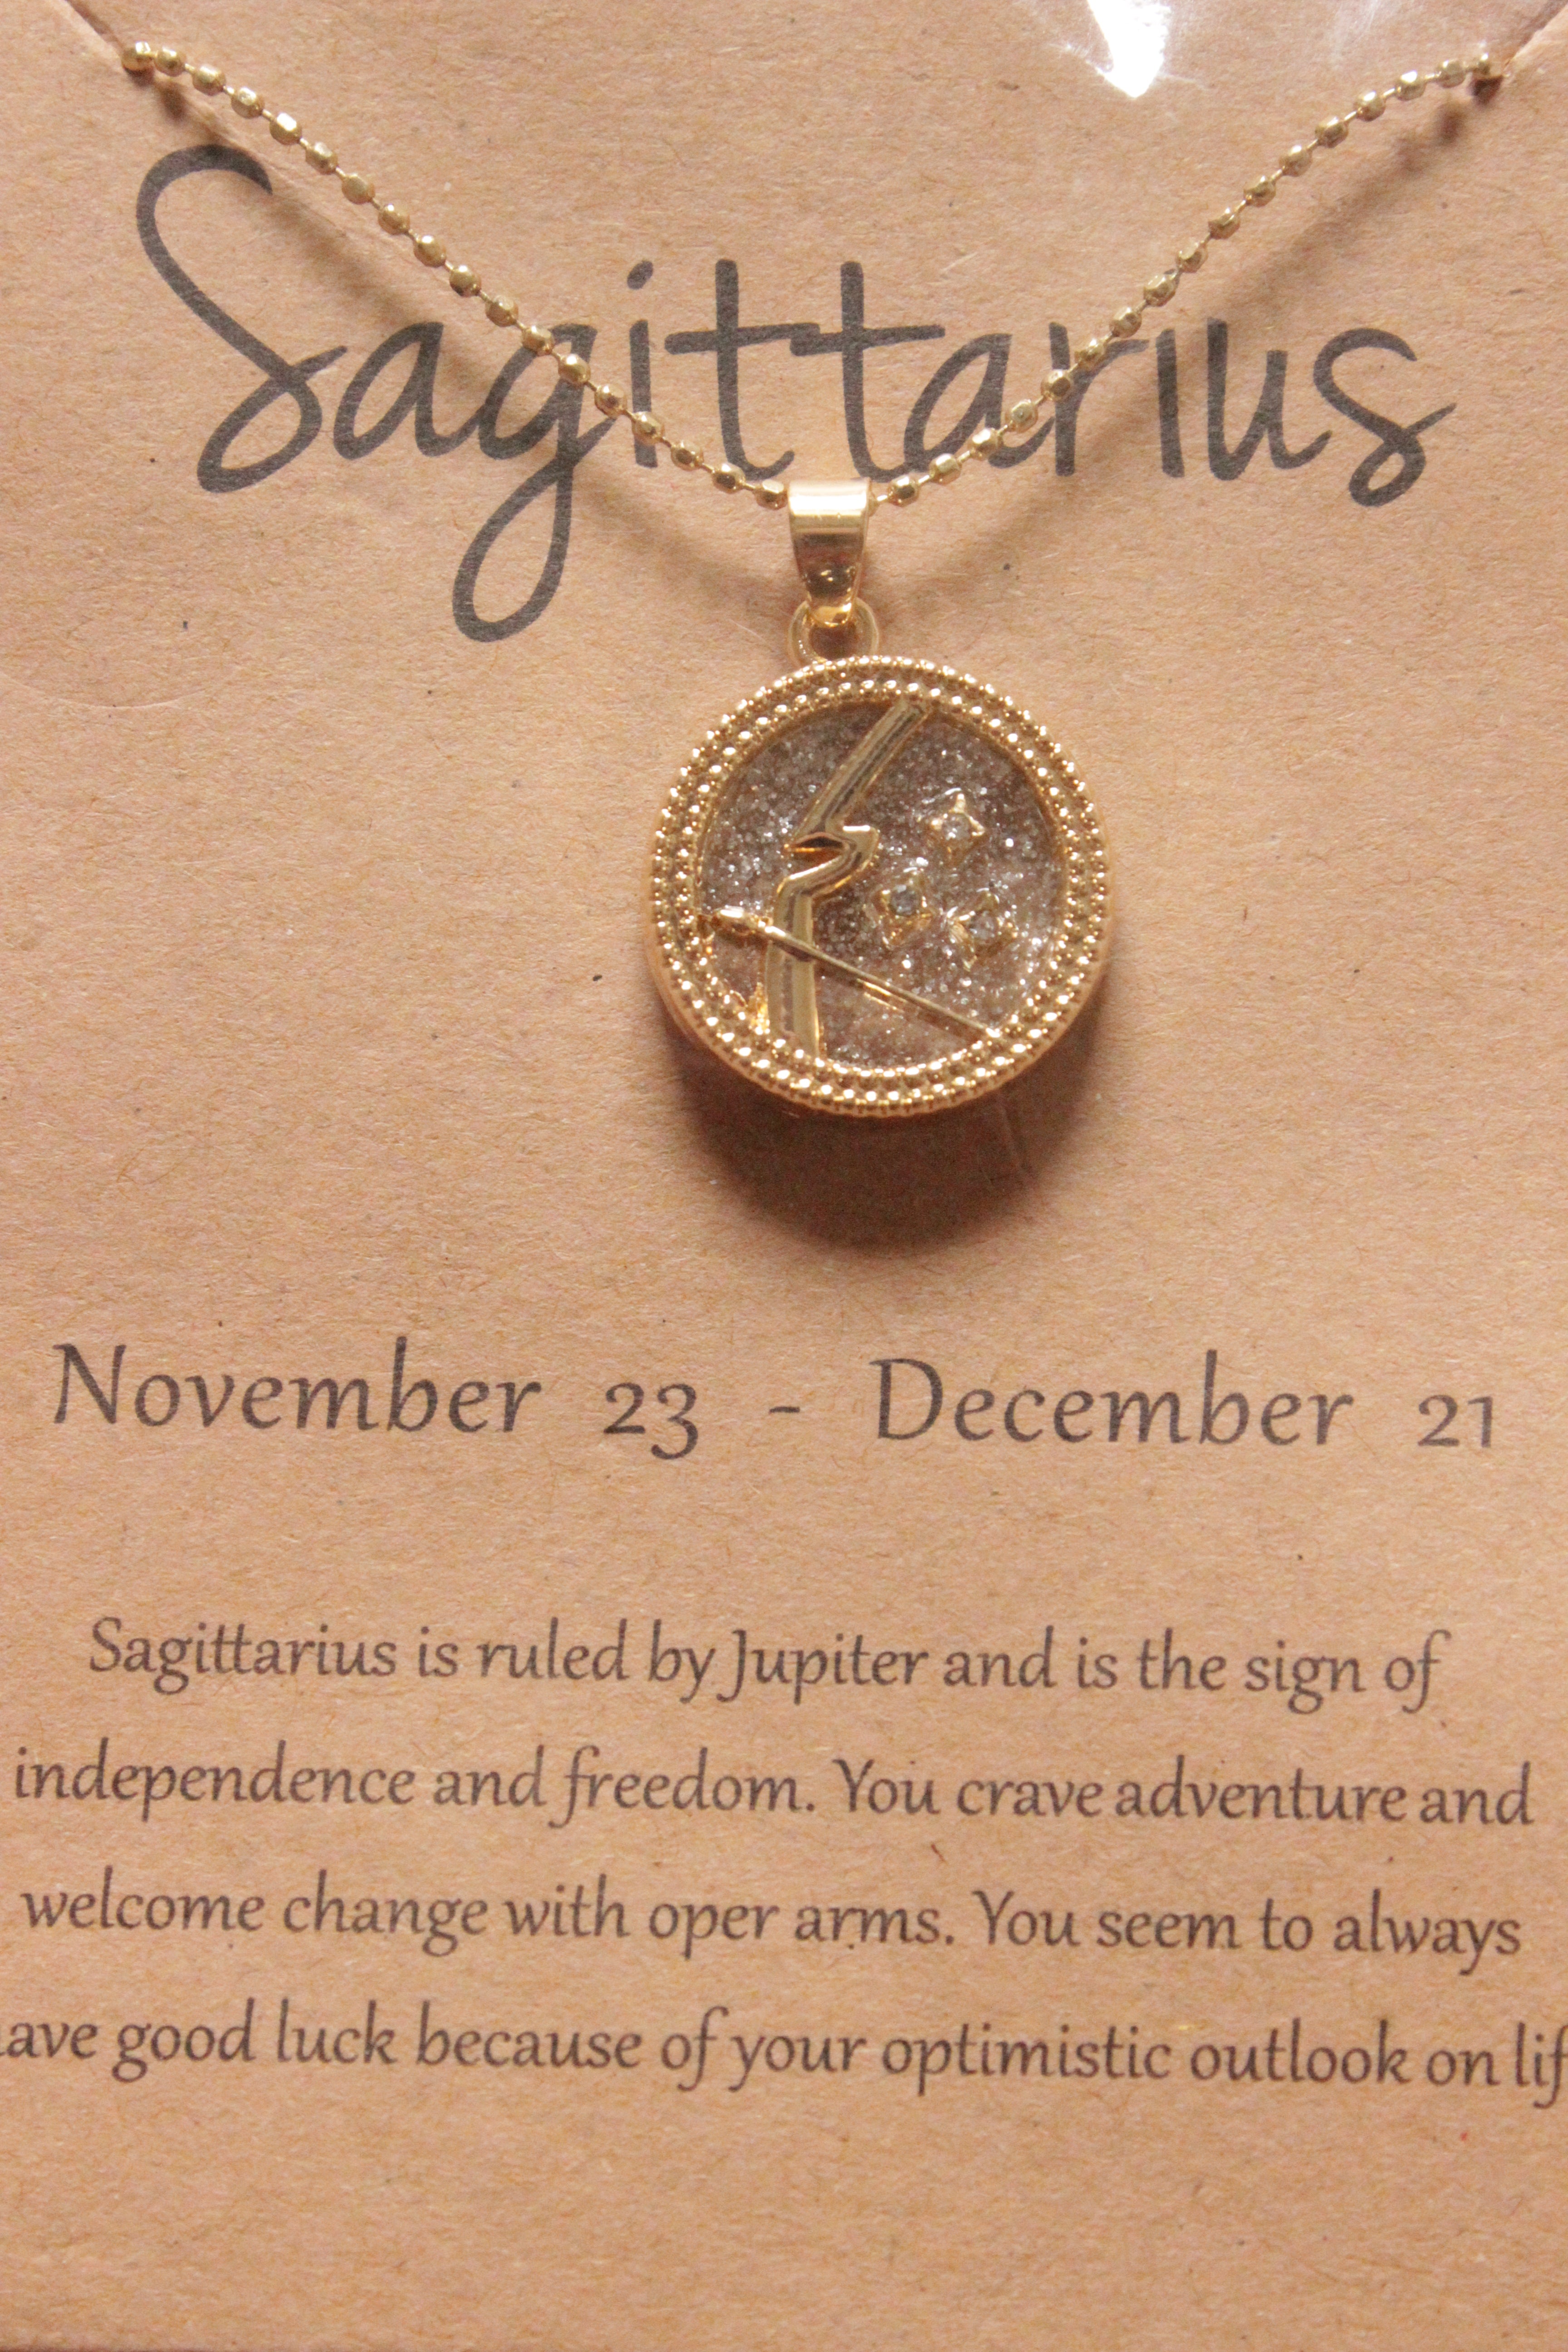 Sagittarius Sun Sign Gold Plated Day Style Round Resin Horoscope Astrology Minimalist Pendant Necklace with Card